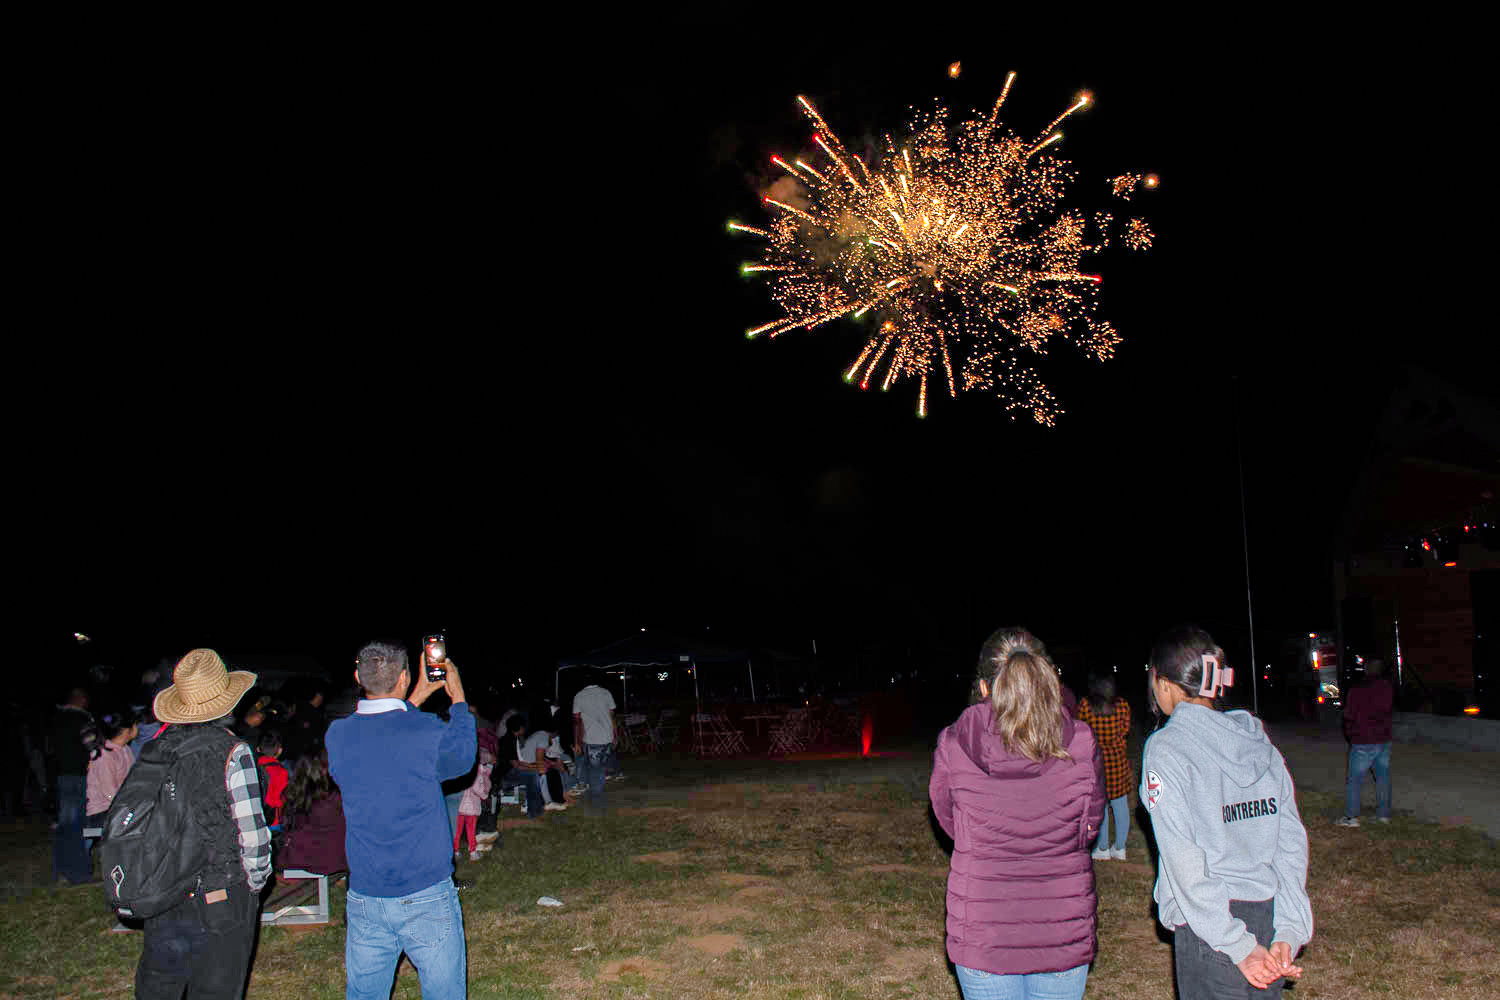 For nearly 15 minutes fireworks were launched in celebration of Mexican Independence Day at Klickitat Prairie Park in Mossyrock Saturday night. Photo by Owen Sexton.